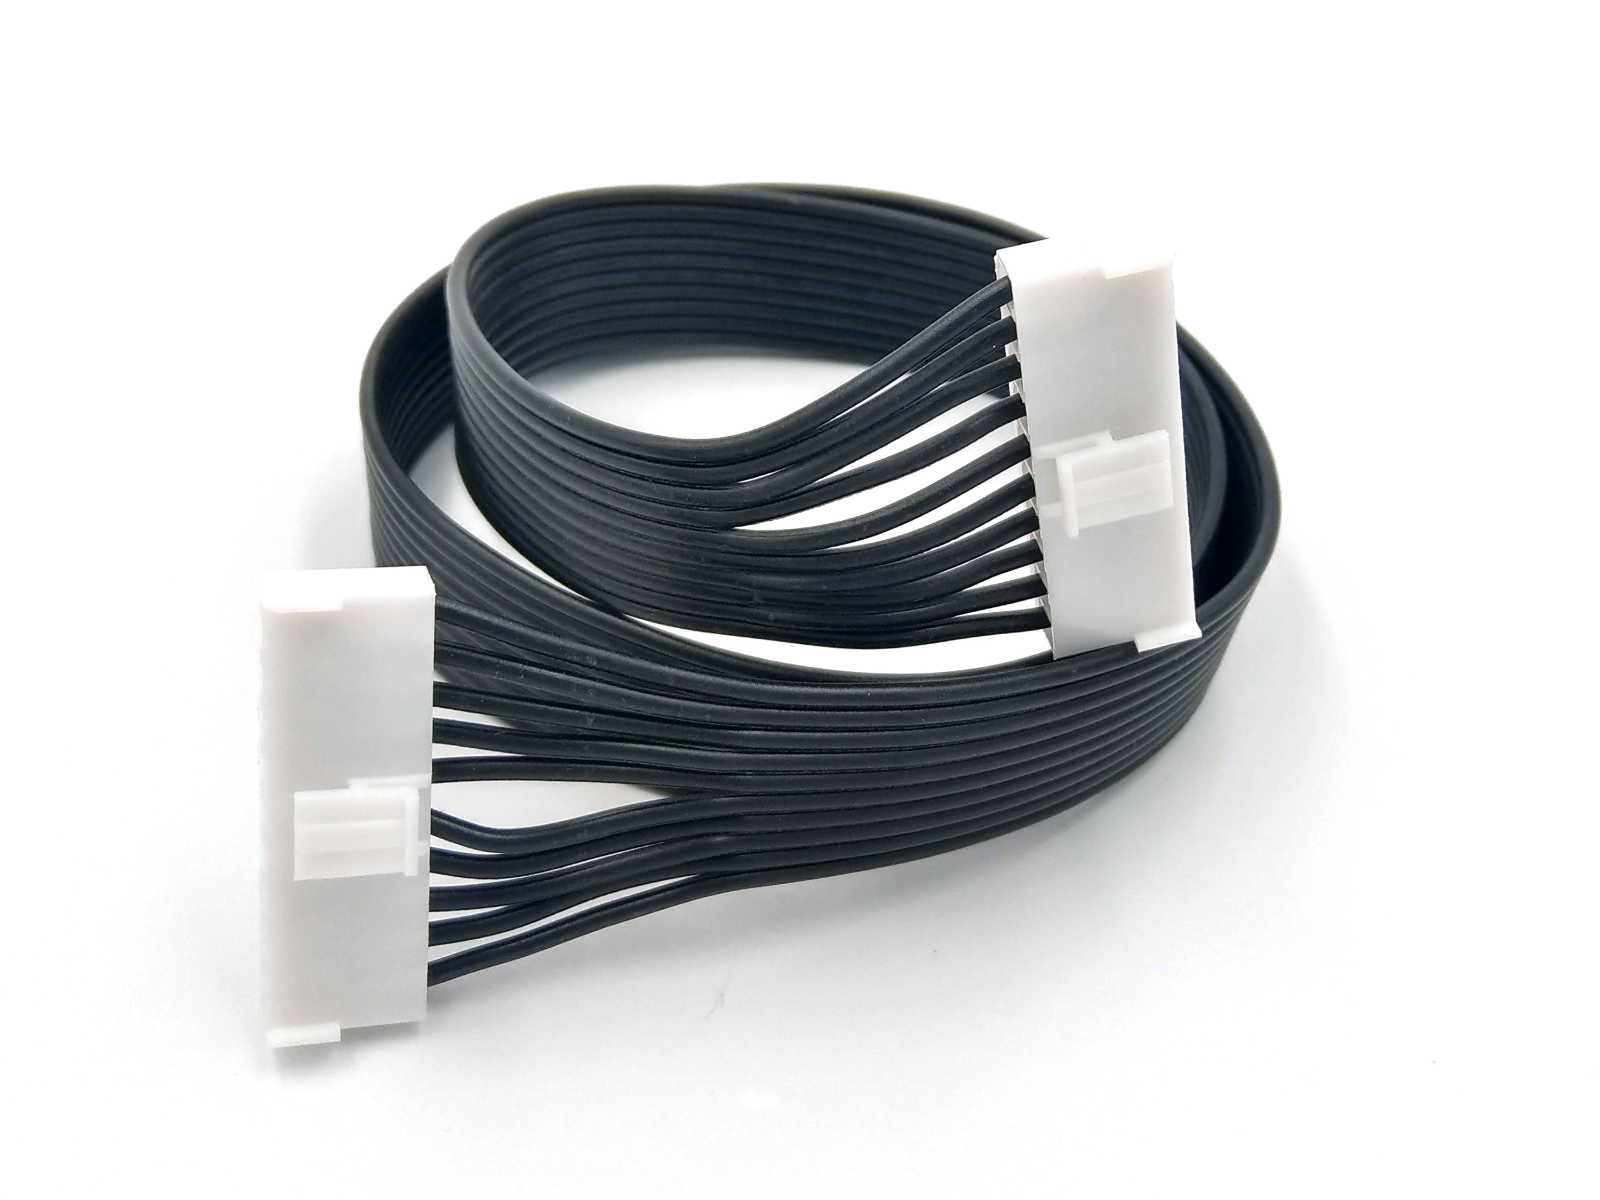 Zortrax - Heatbed Cable Plus M300-M300 Dual